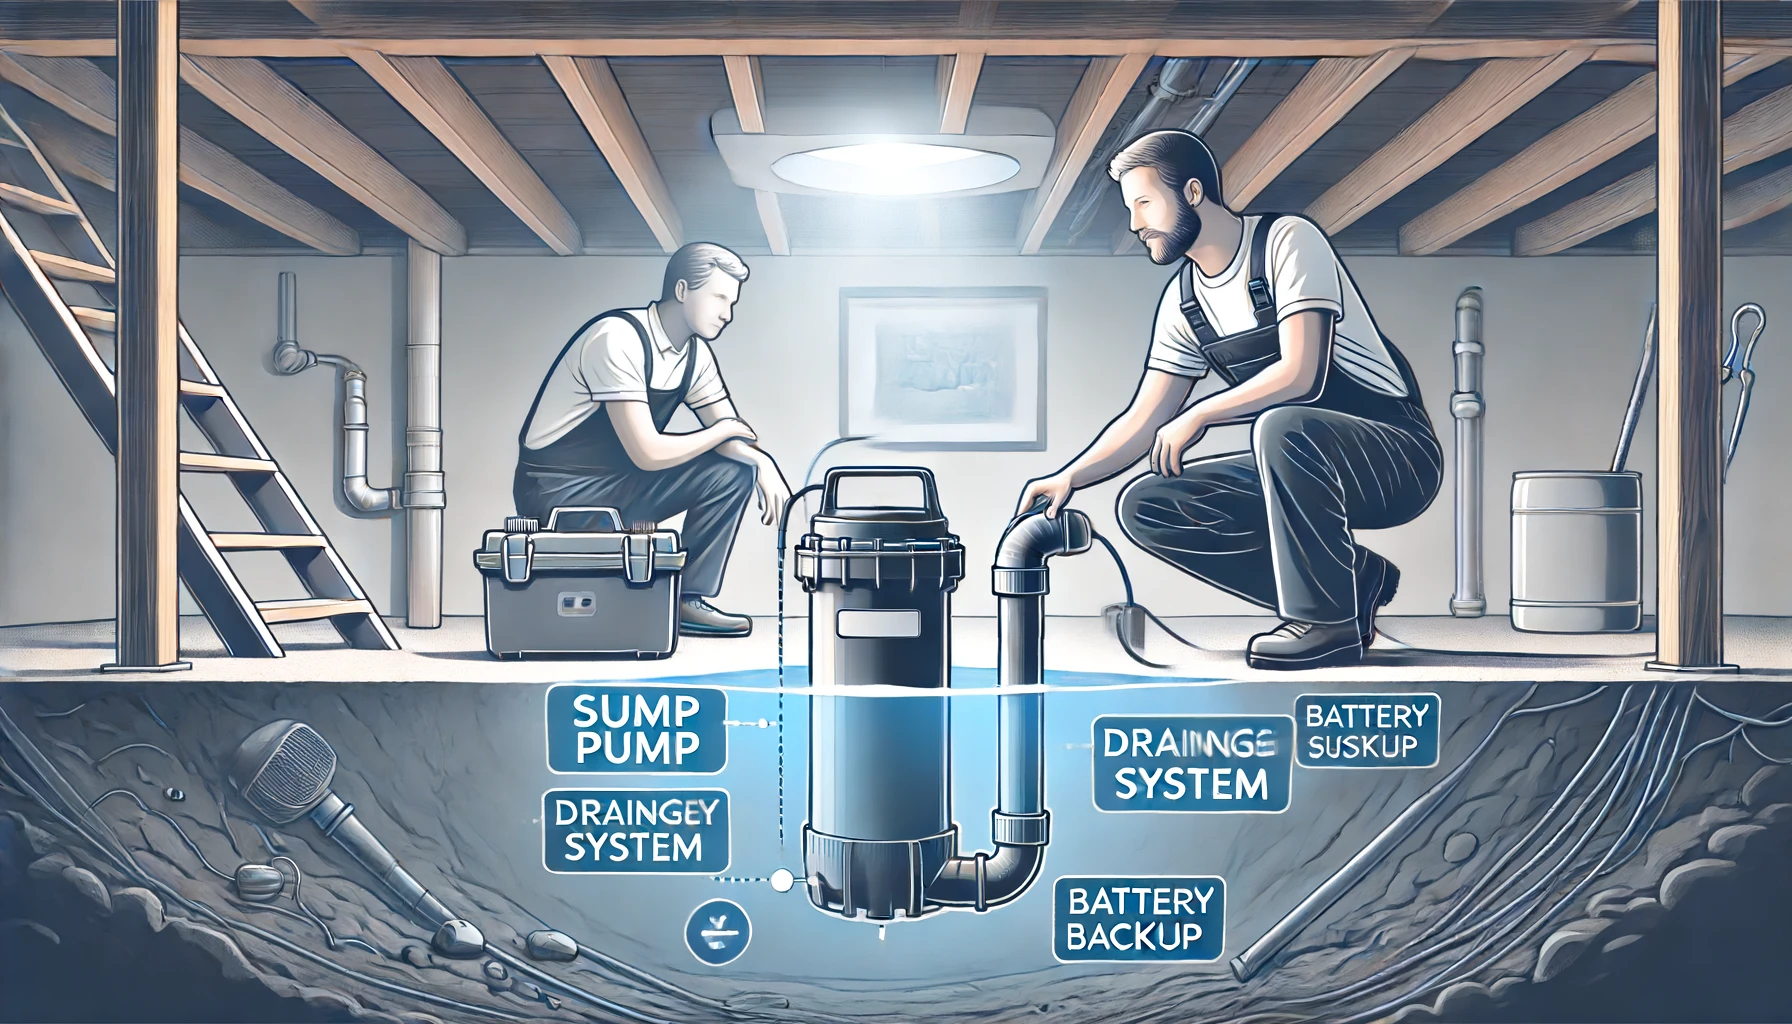 Preventing Basement Flooding: How Sump Pumps Can Save the Day